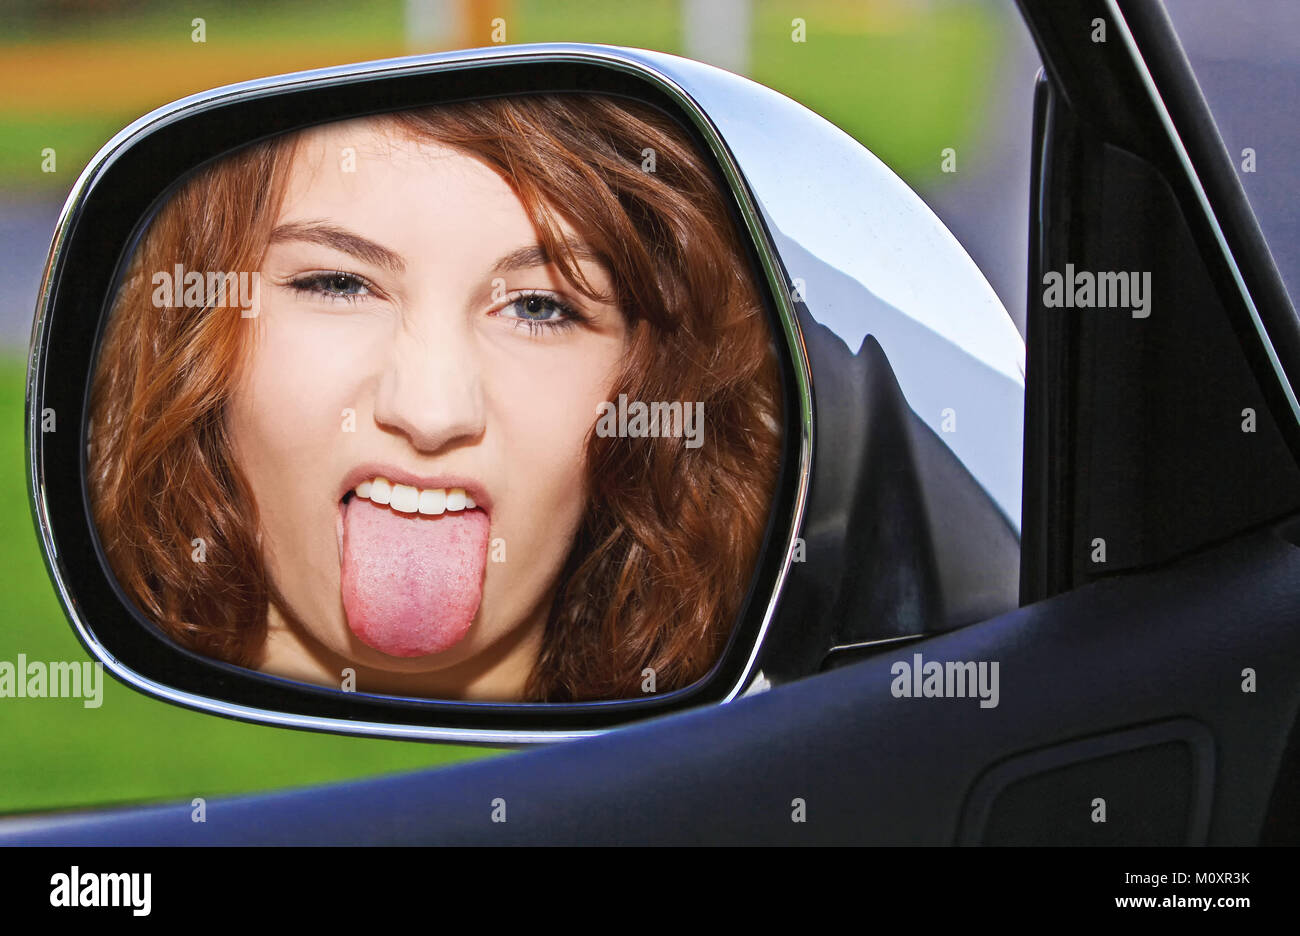 Young woman sticking tongue out in a side mirror of a car Stock Photo